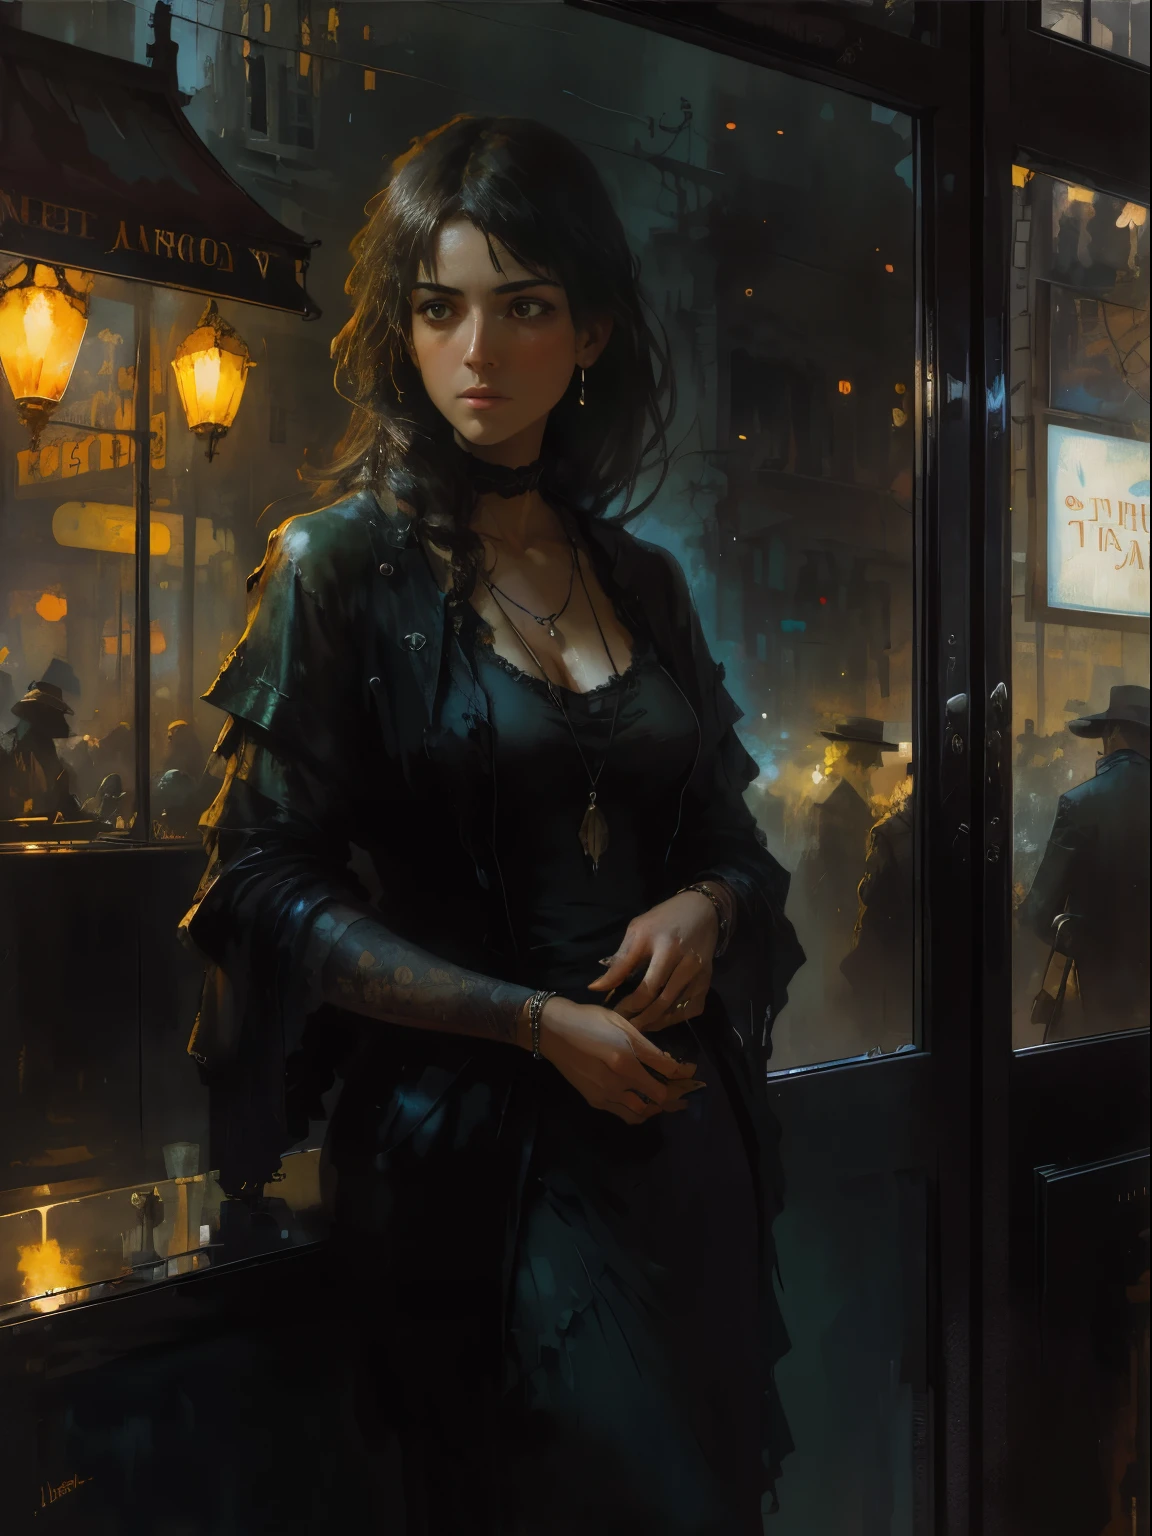 painting of woman, with influence of Jeremy Mann, Jeremy Mann, style of Jeremy Mann, Jeremy Mann painting, Jeremy Mann art, Ron Hicks, Liepke, Jeremy Mann and alphonse mucha, Works that influenced Edmund Blampid, robert lenkiewicz, Casey Baugh and James Jean, Works that influenced Willem Kalf, Nick Alm, tumbler, figurative art, Intense watercolor painting, watercolor detailed art,Beautiful and expressive paintings, Beautiful artwork illustration, wonderful, cool beauty, highest quality,official art, women only, sharp outline, melancholy, nostalgia, nostalgia,Eyes without pupils, color eye, ideal anima, In search of lost time, marcel proust, sentimental, street corner